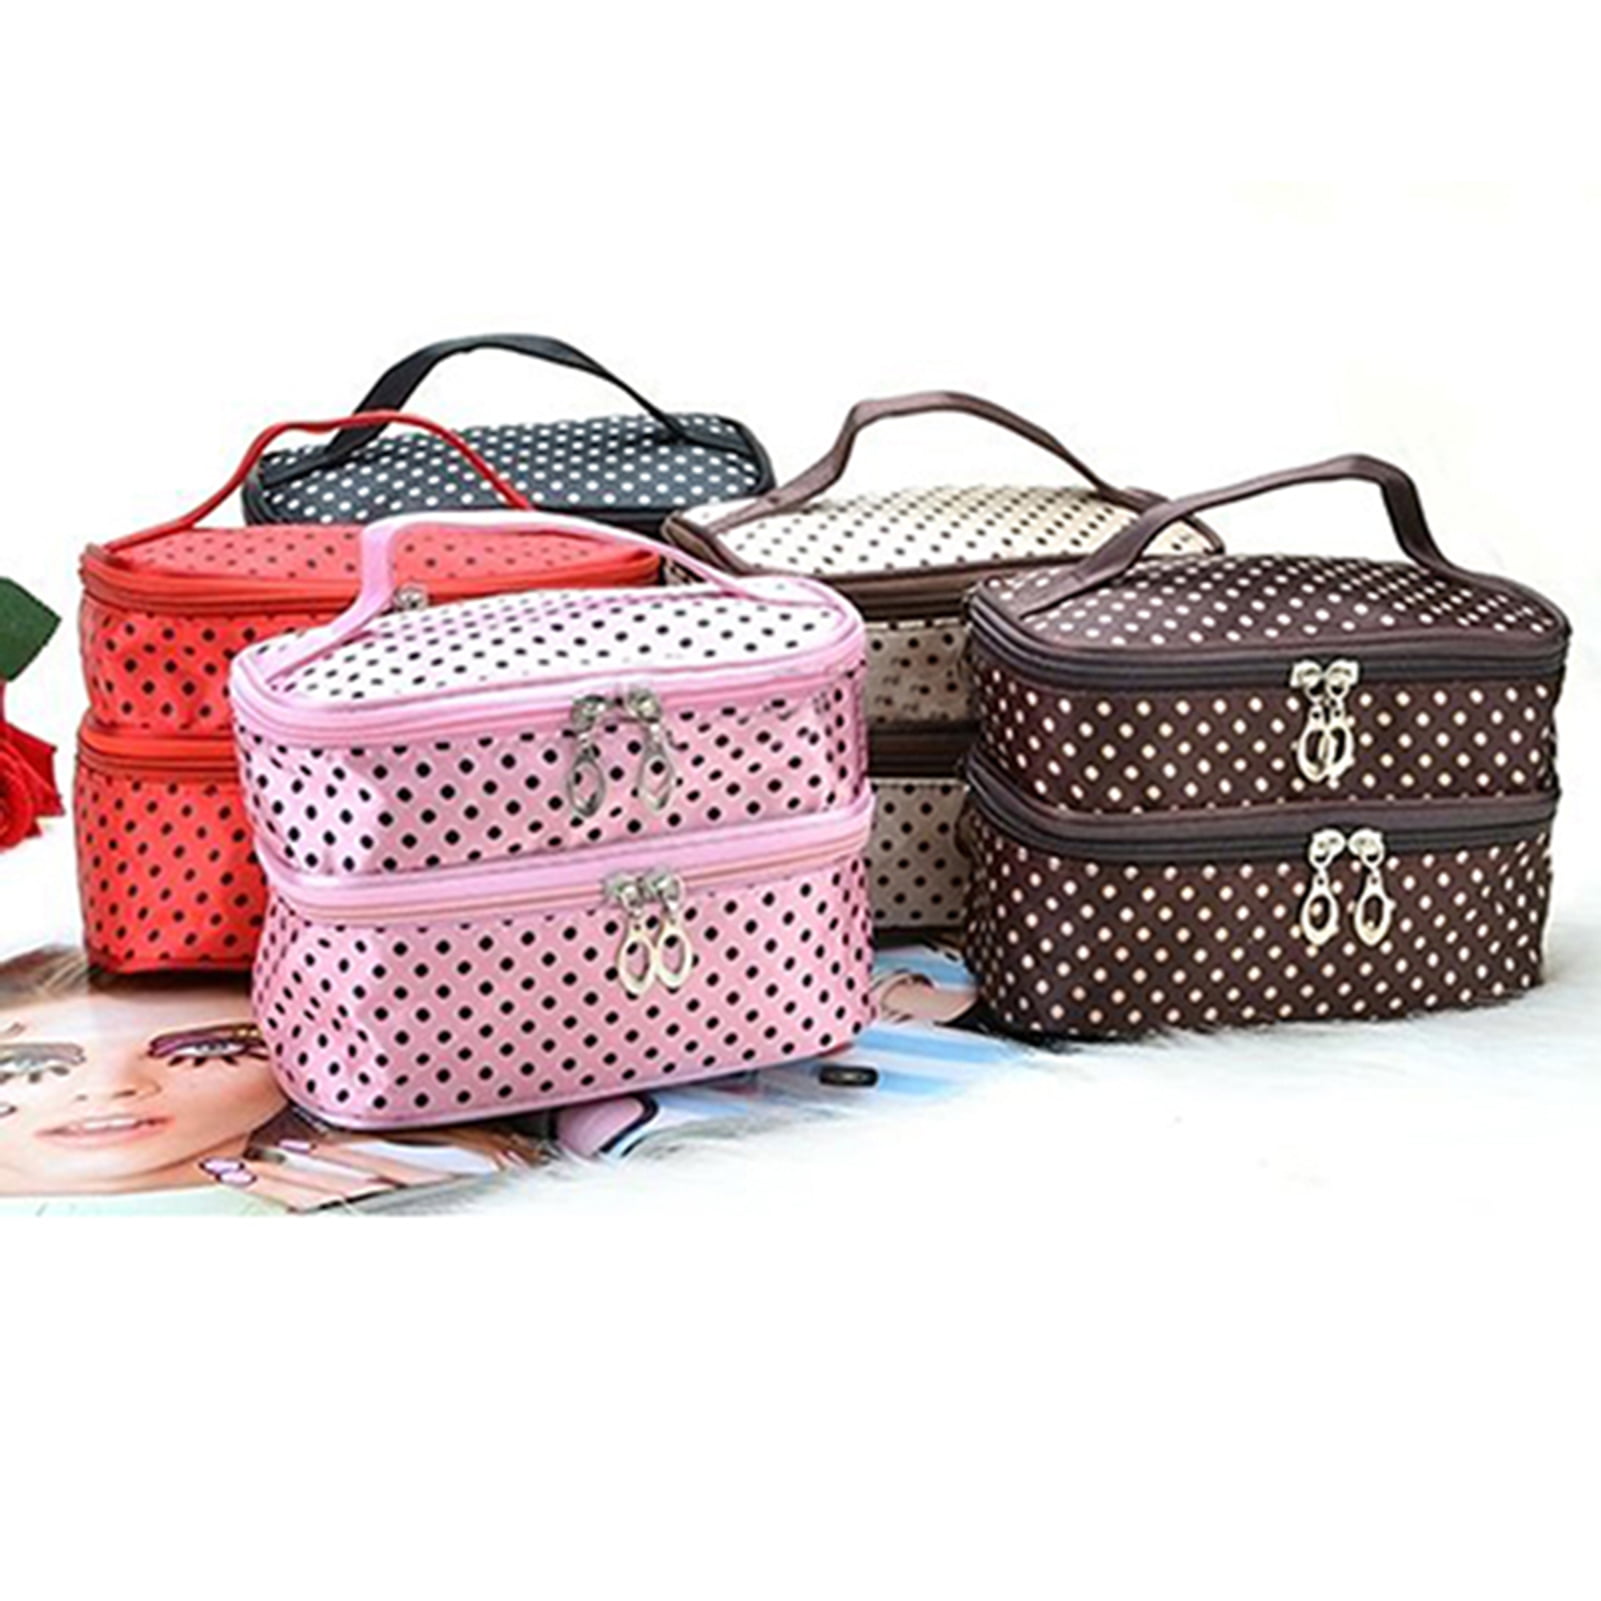  Yewamia Travel Makeup Case Professional PU Cosmetic